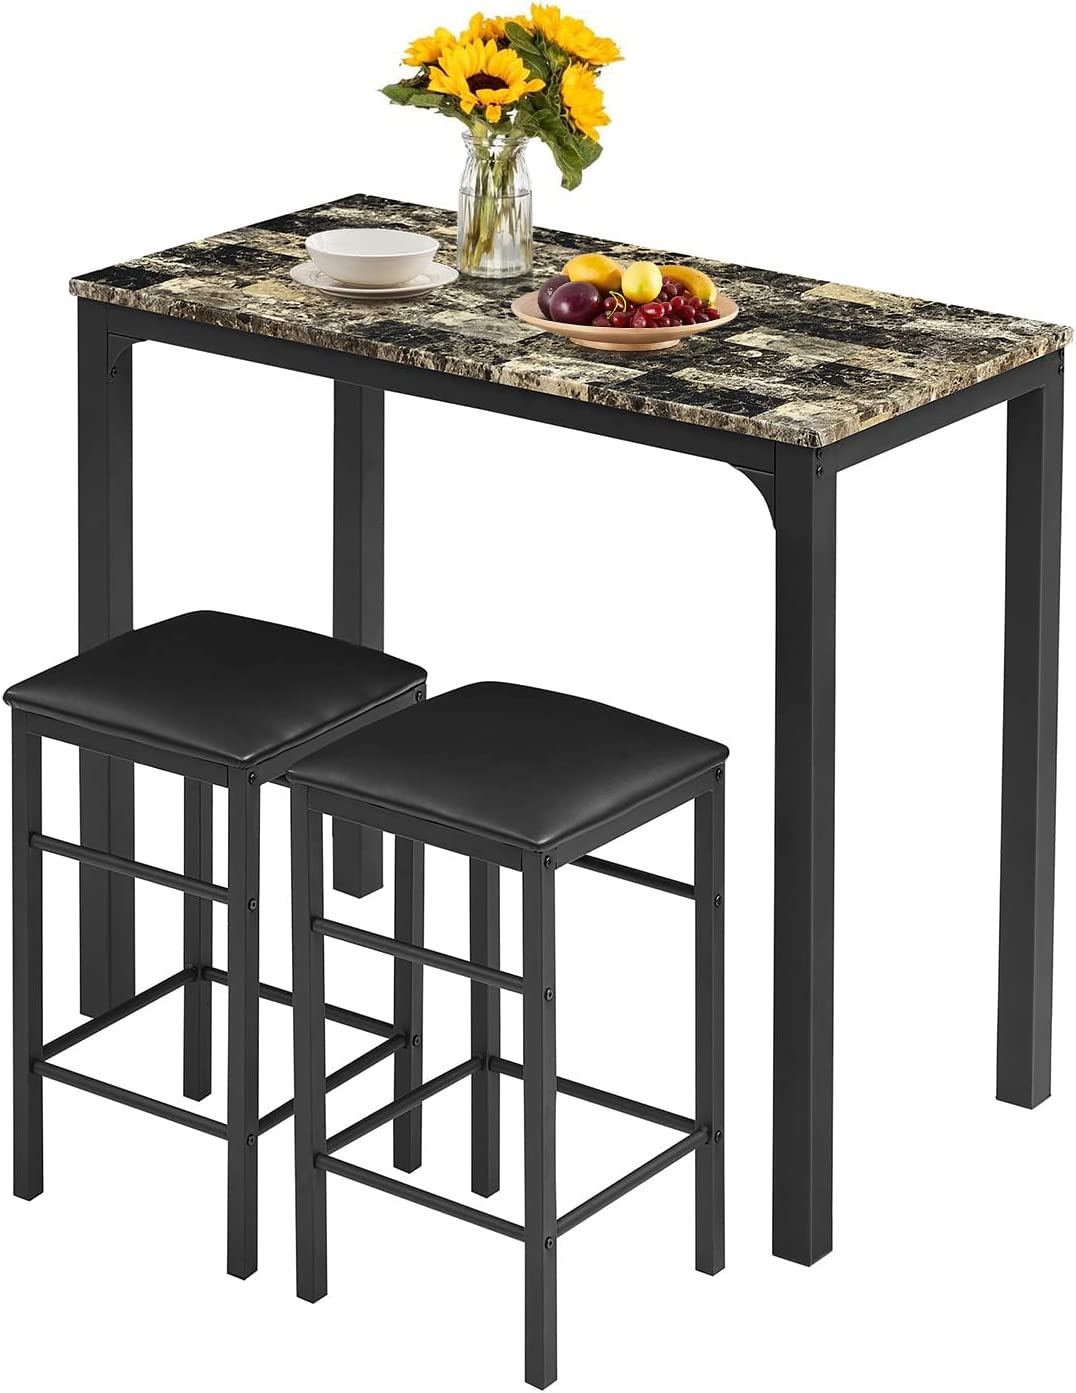 VECELO 3 Piece Metal Dinette Set with Laminated Faux Marble Top for Dining Room/Kitchen